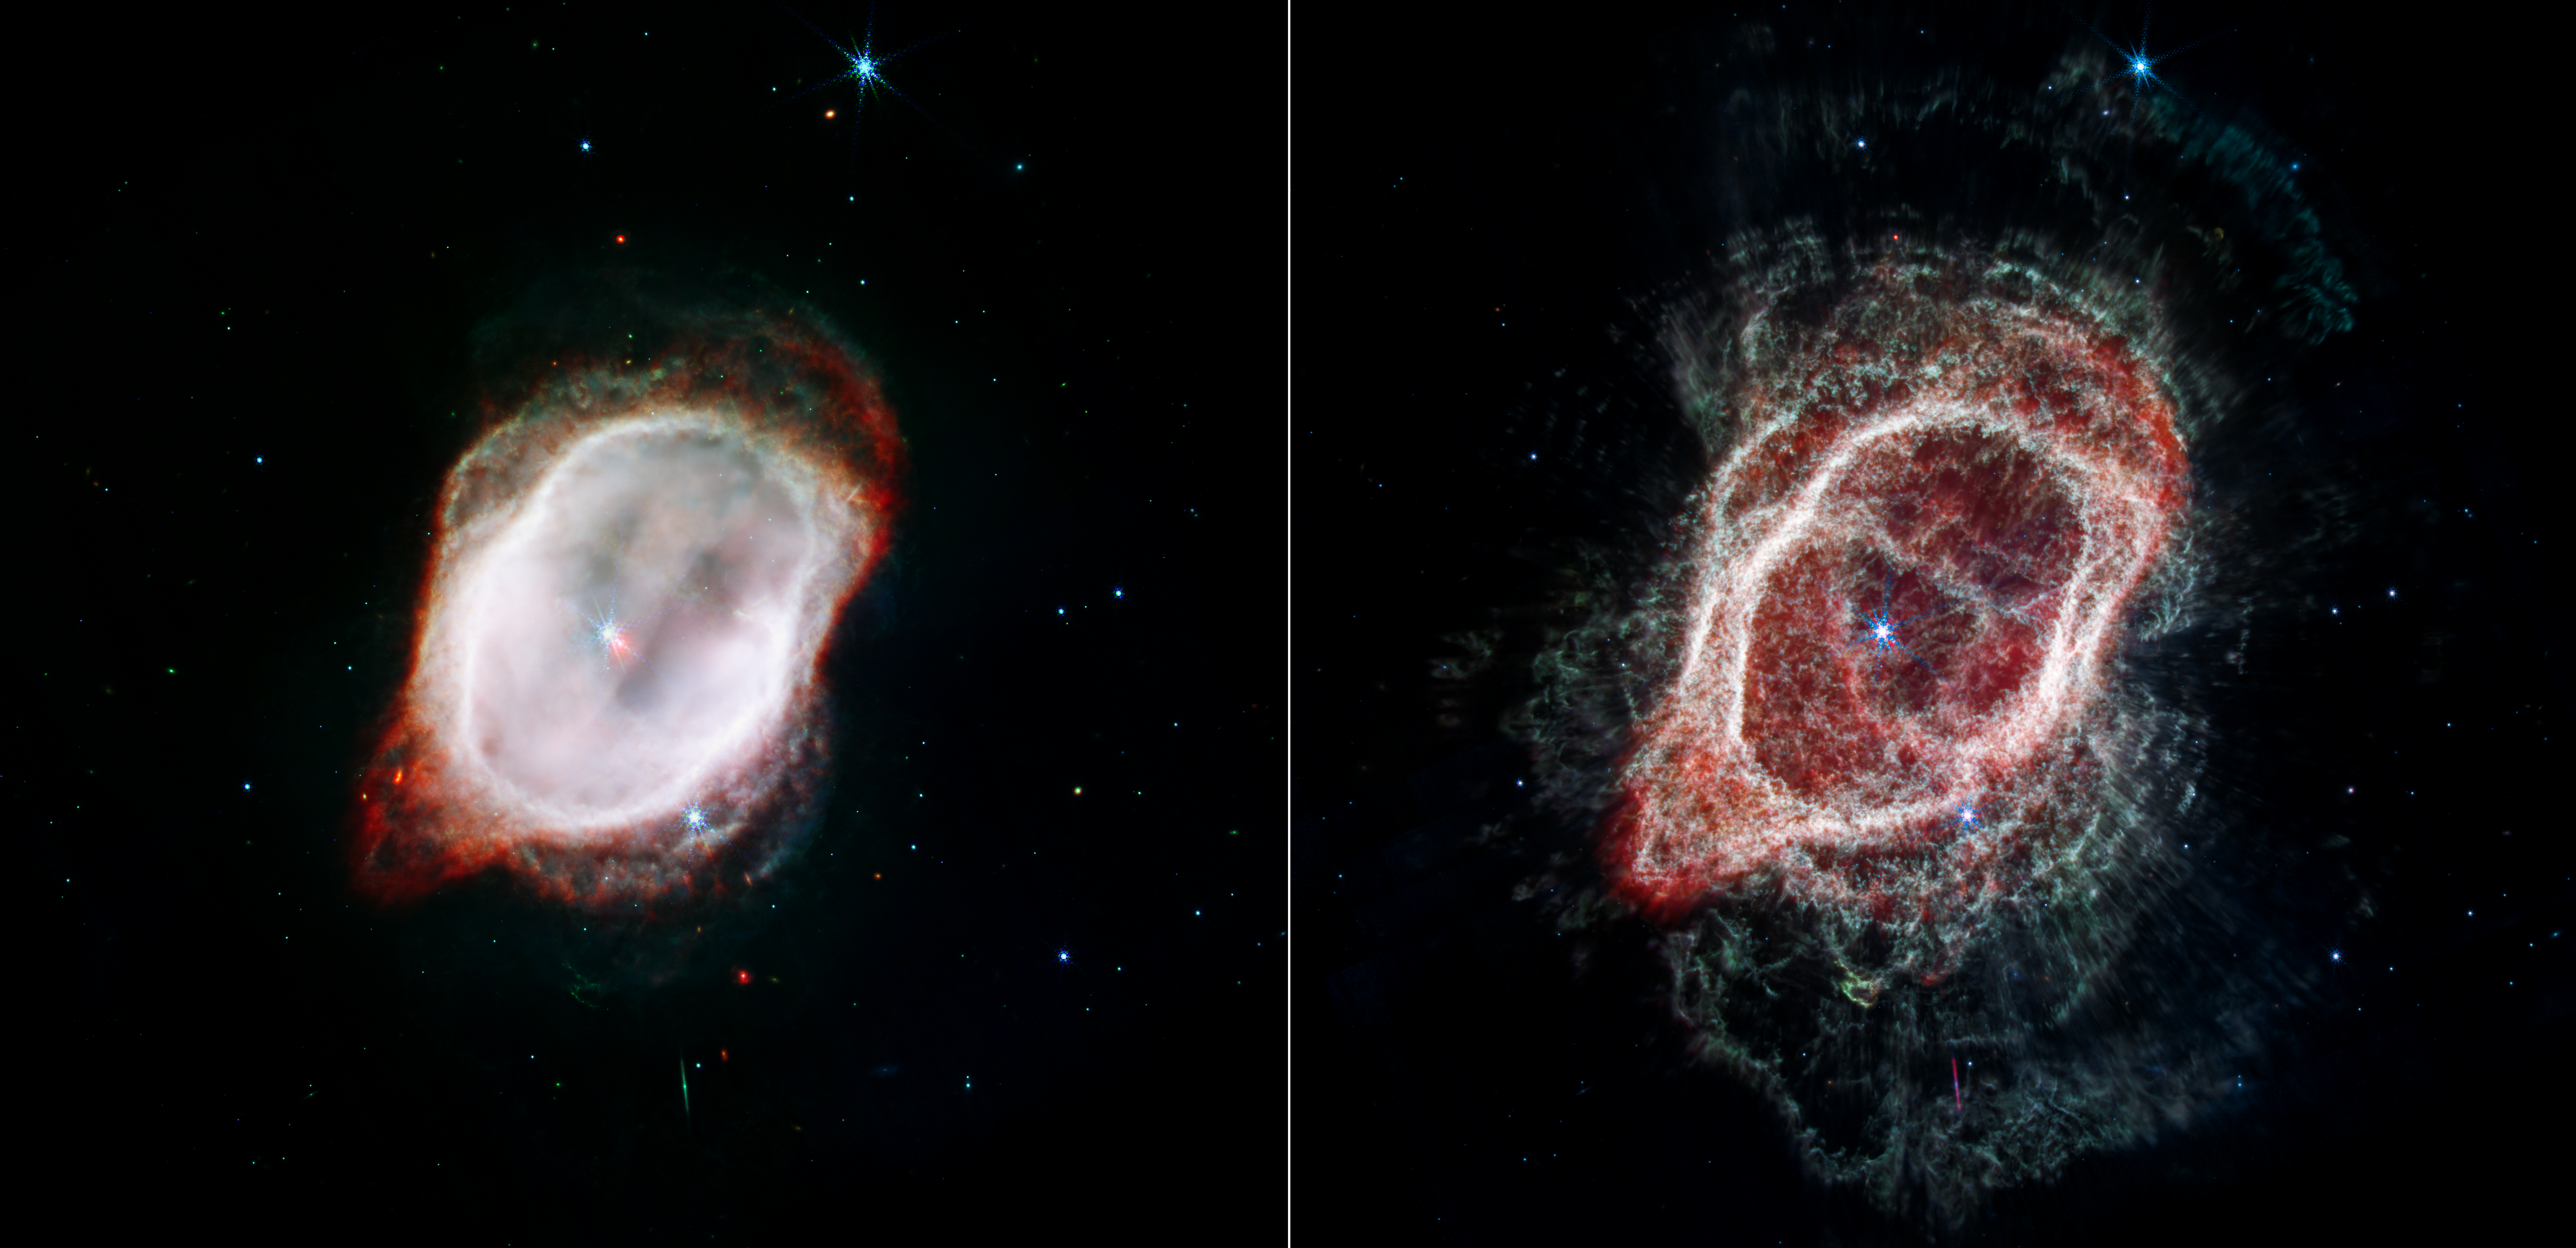 The Webb Space Telescope offers dramatically different views of the same scene! Each image combines near- and mid-infrared light from three filters. At left, Webb’s image of the Southern Ring Nebula highlights the very hot gas that surrounds the central stars. This hot gas is banded by a sharp ring of cooler gas, which appears in both images. At right, Webb’s image traces the star’s scattered outflows that have reached farther into the cosmos. Most of the molecular gas that lies outside the band of cooler gas is also cold. It is also far clumpier, consisting of dense knots of molecular gas that form a halo around the central stars. Image: NASA, ESA, CSA, STScI, Orsola De Marco (Macquarie University) / Joseph DePasquale (STScI)